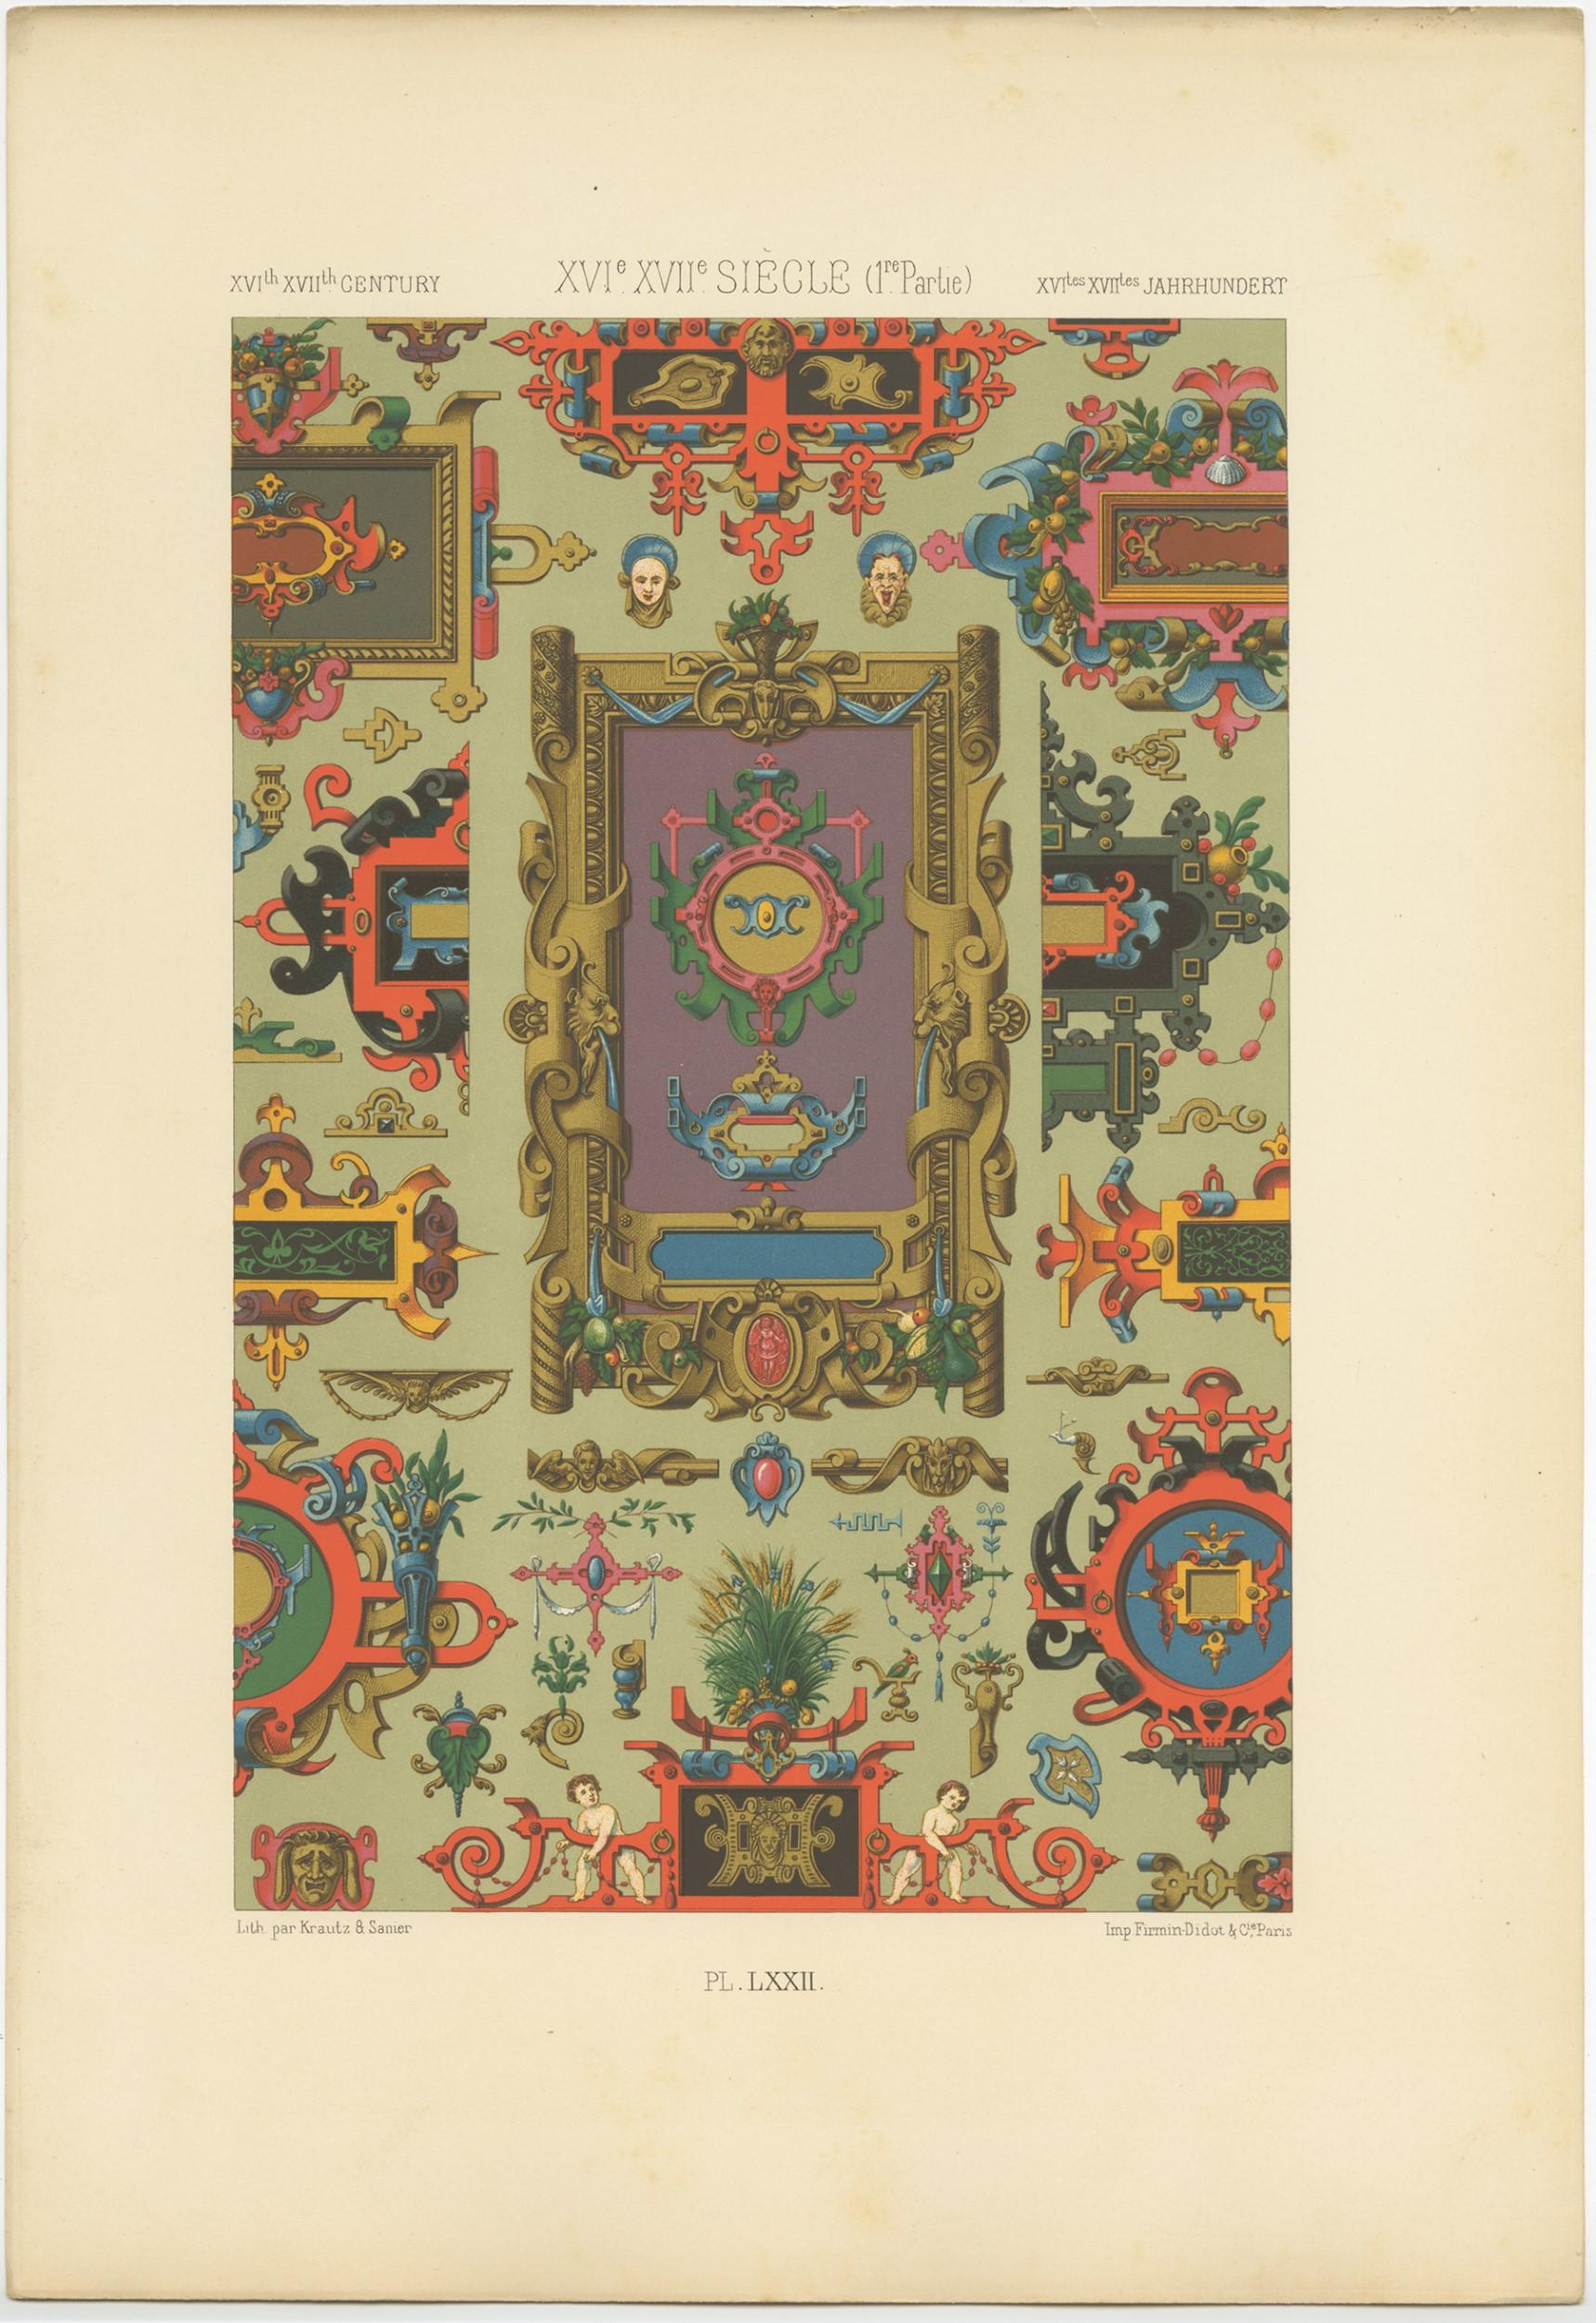 Antique print titled 'XVIth and XVIIth Century - XVIe et XVIIe Siecle - XVItes et XVIItes Jahrhundert'. Chromolithograph of XVIth and XVIIth Century ornaments and decorative arts. This print originates from 'l'Ornement Polychrome' by Auguste